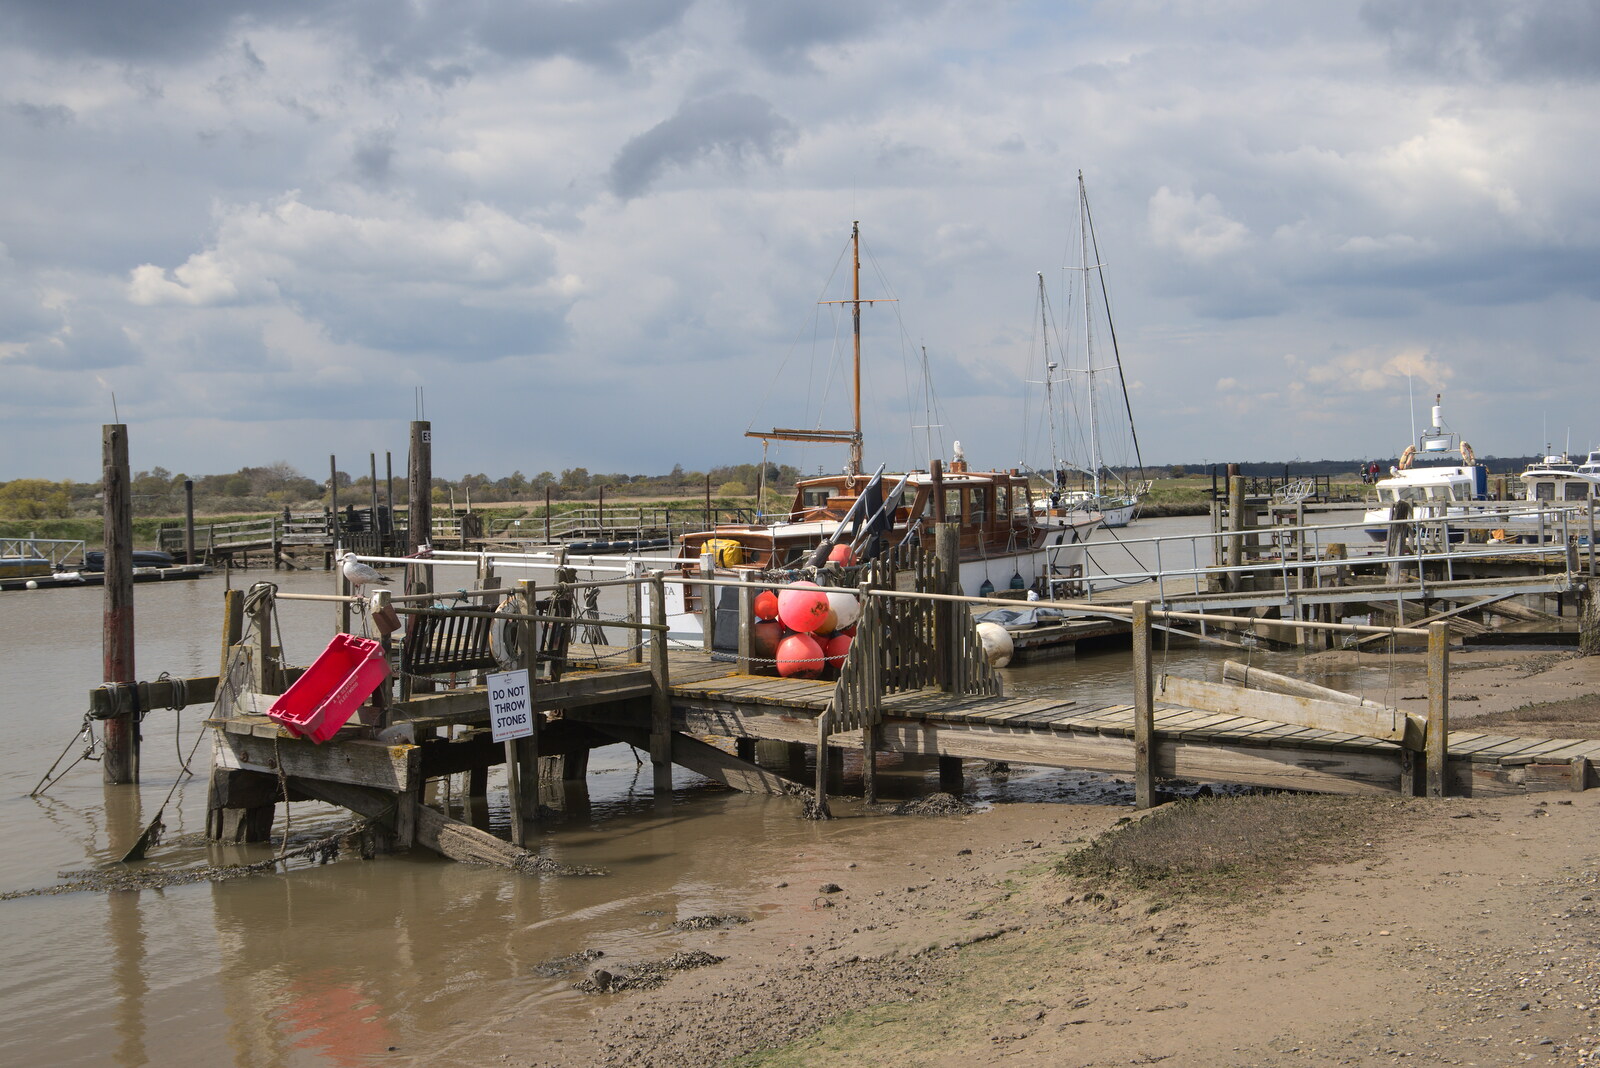 Pontoons at Blackshore from A Chilly Trip to the Beach, Southwold Harbour, Suffolk - 2nd May 2021